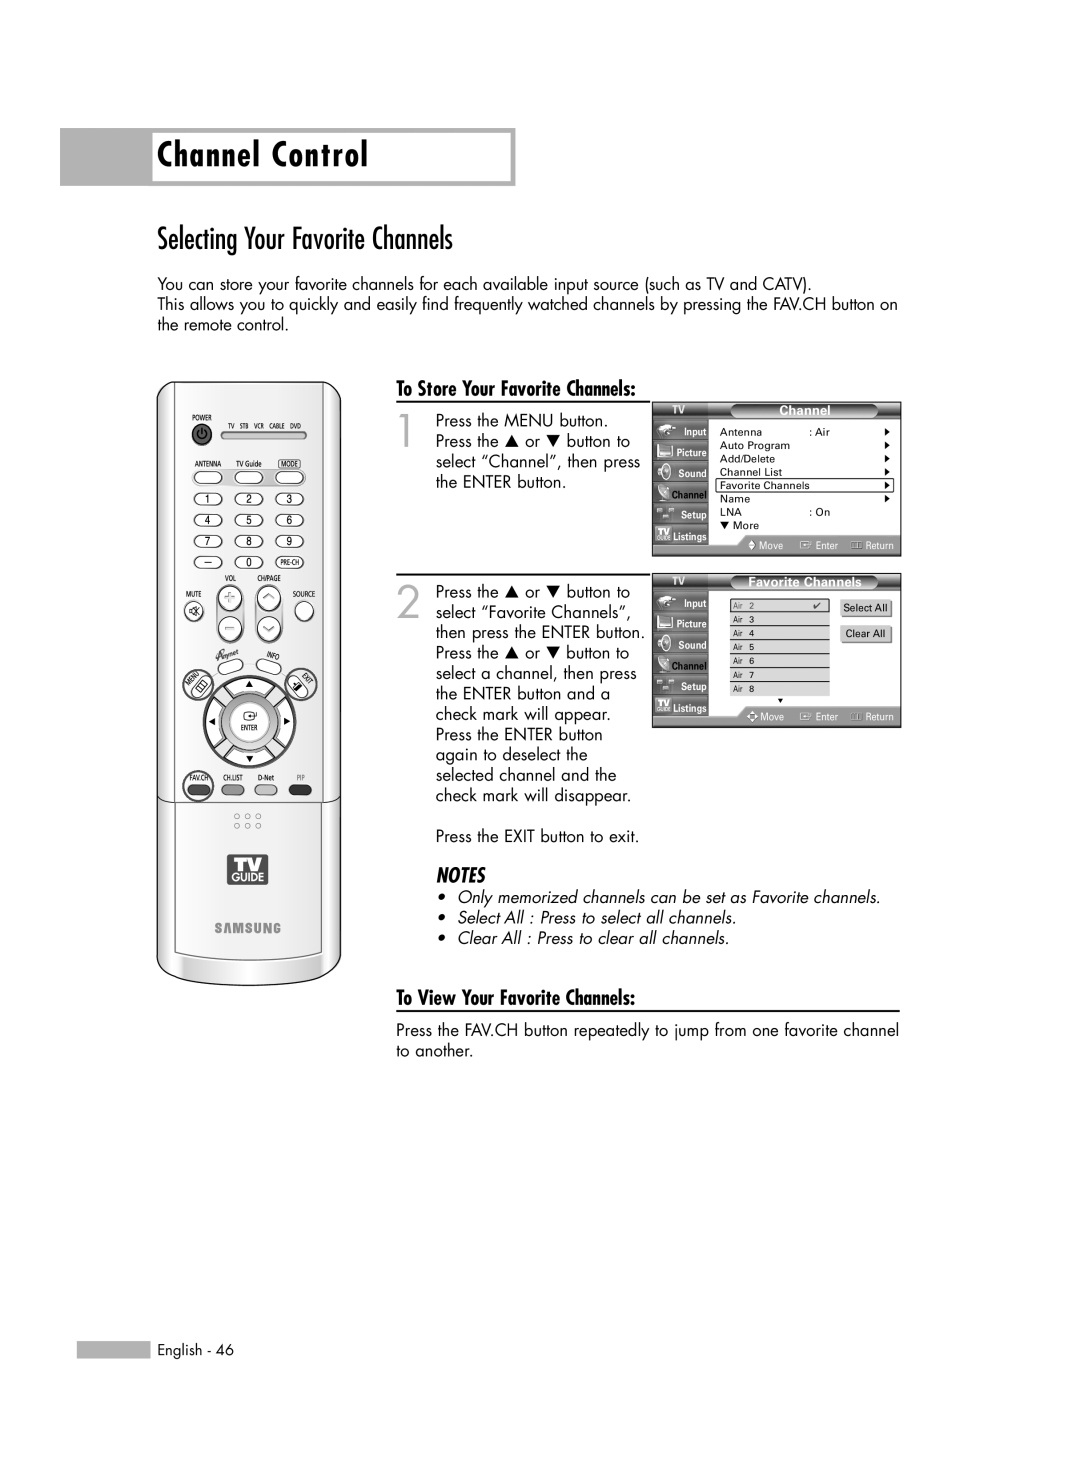 Samsung HL-R5688W manual Channel Control, Selecting Your Favorite Channels, To Store Your Favorite Channels 